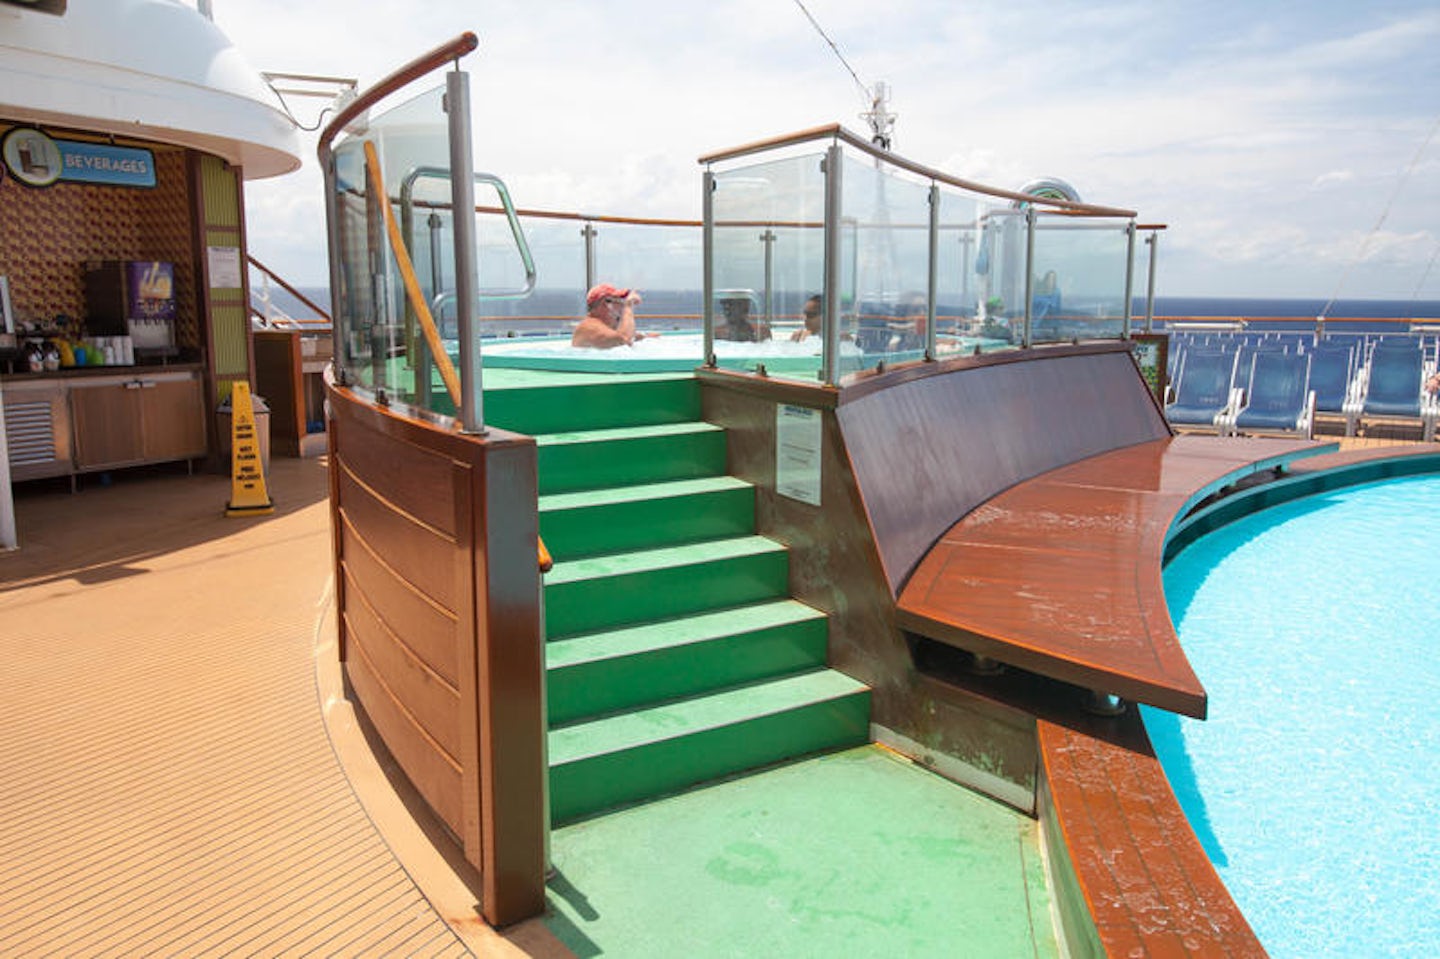 The Lido Deck Whirlpools on Carnival Breeze